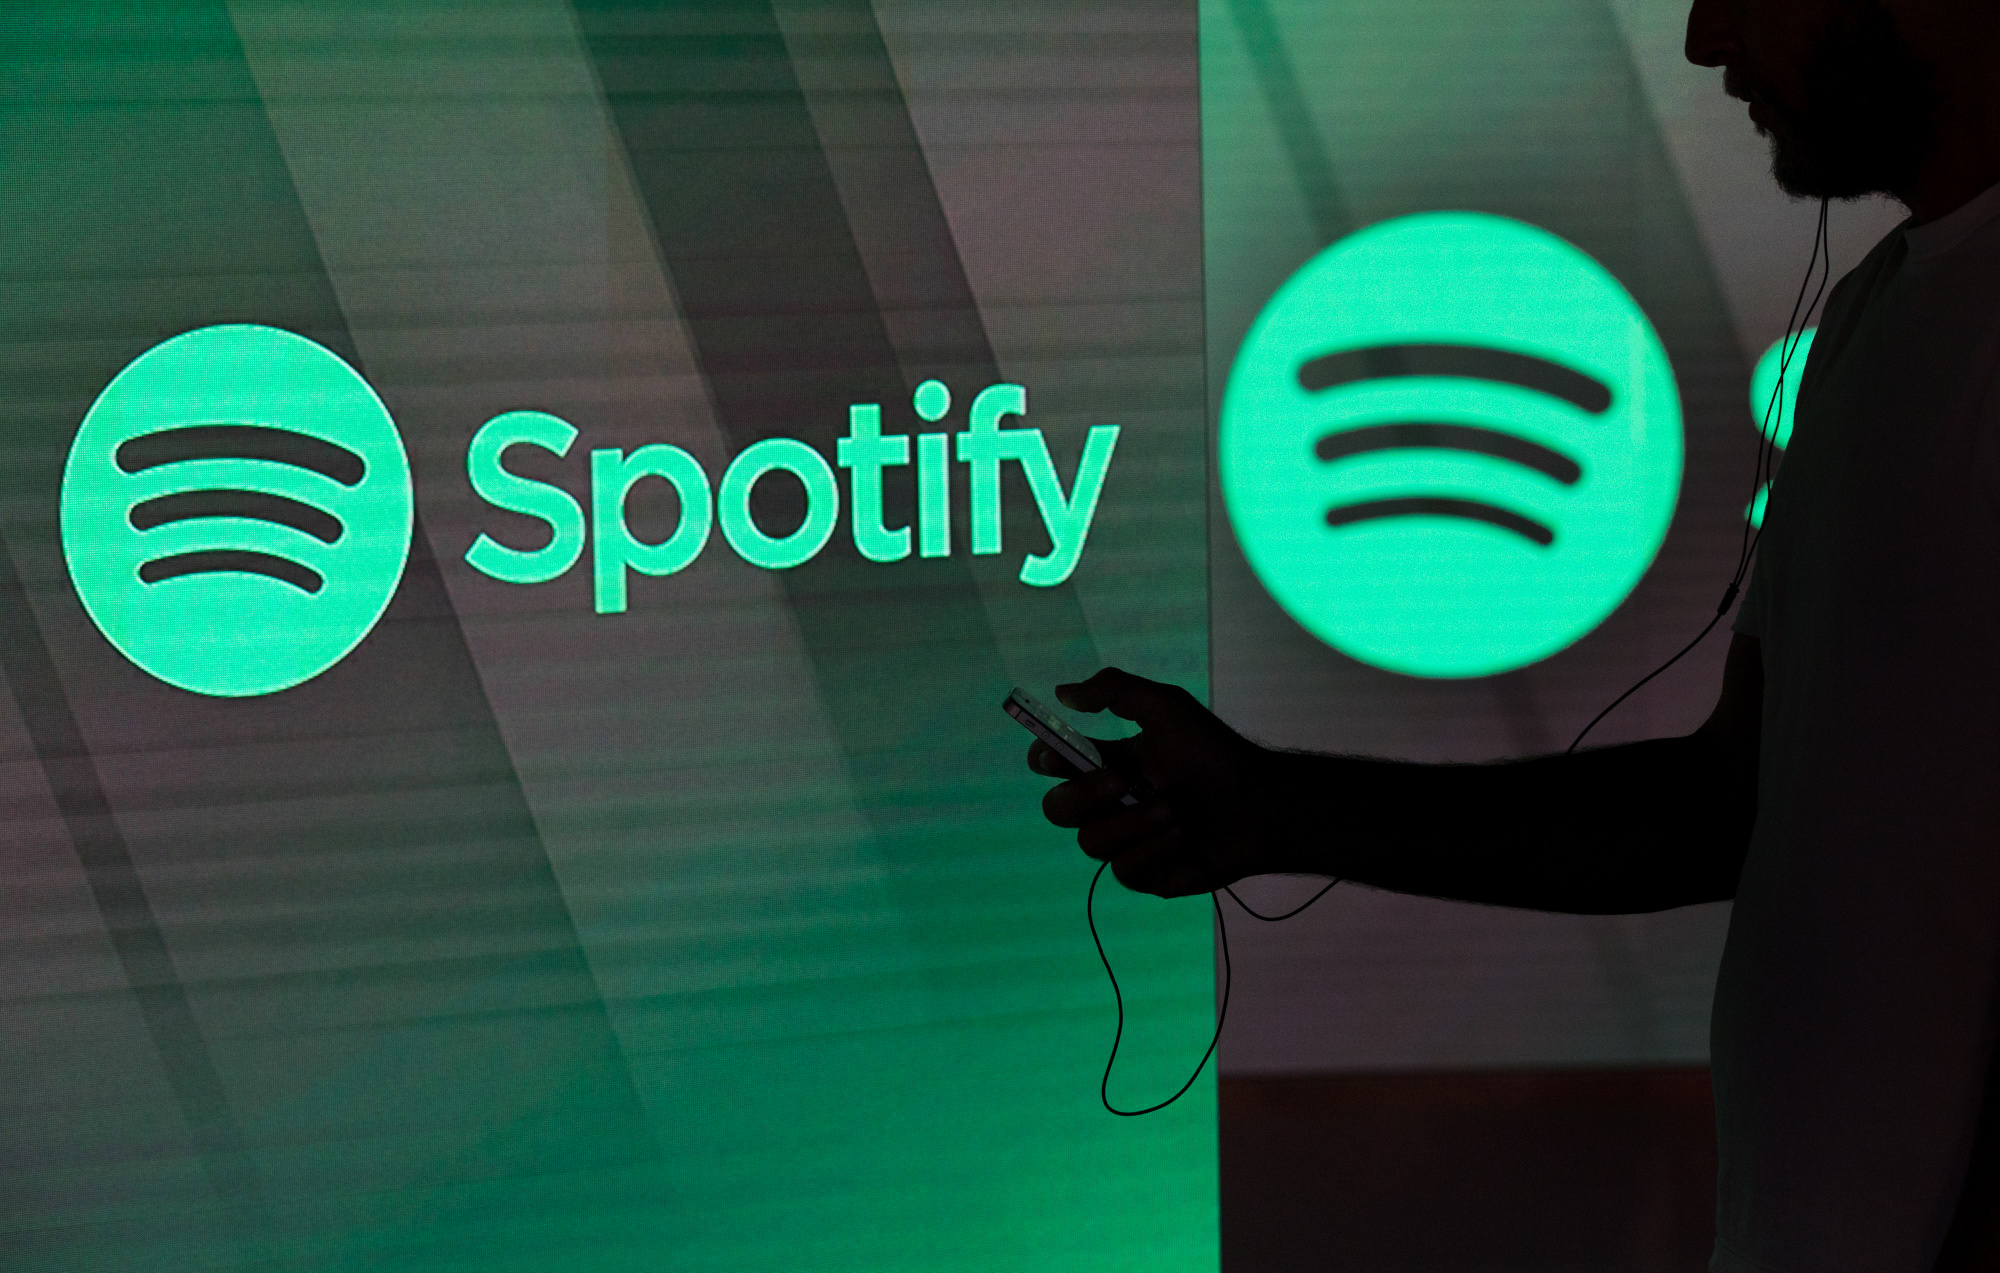 Spotify Is Said to Be in Talks to Buy the Ringer in Sports Push - Bloomberg